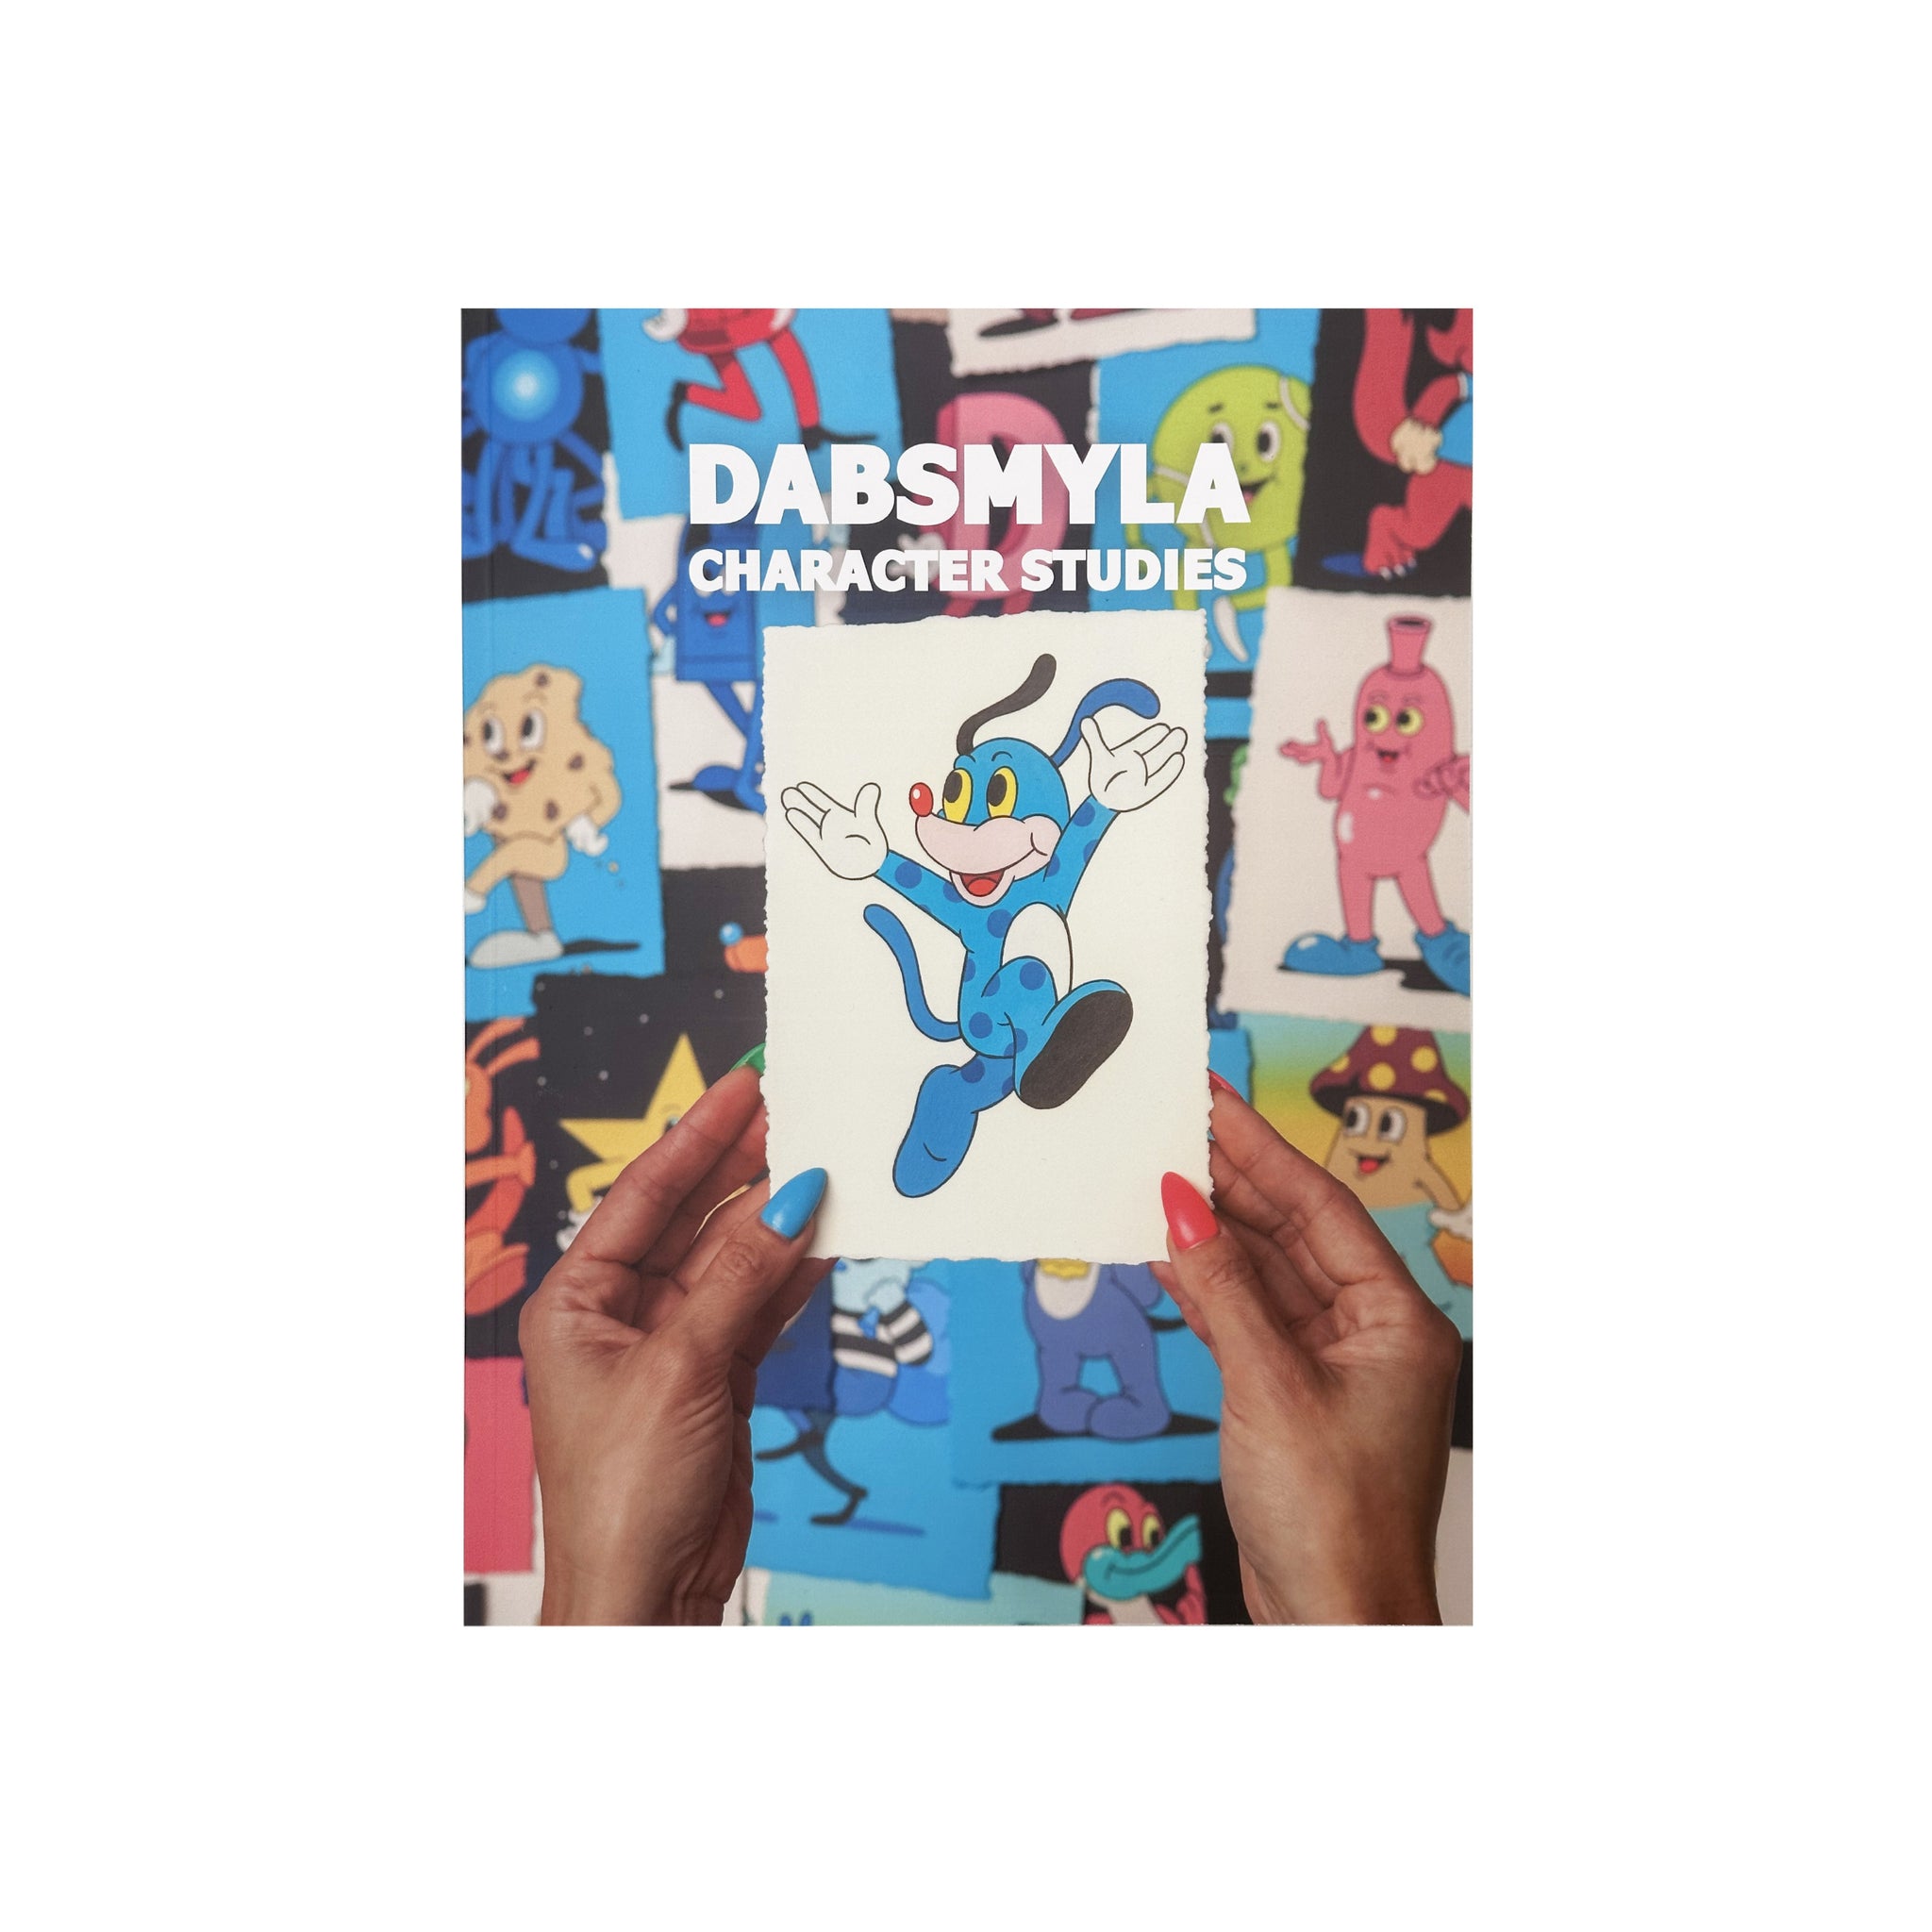 CONTROL Gallery "Exhibition 002: DABSMYLA Character Studies" Catalogue